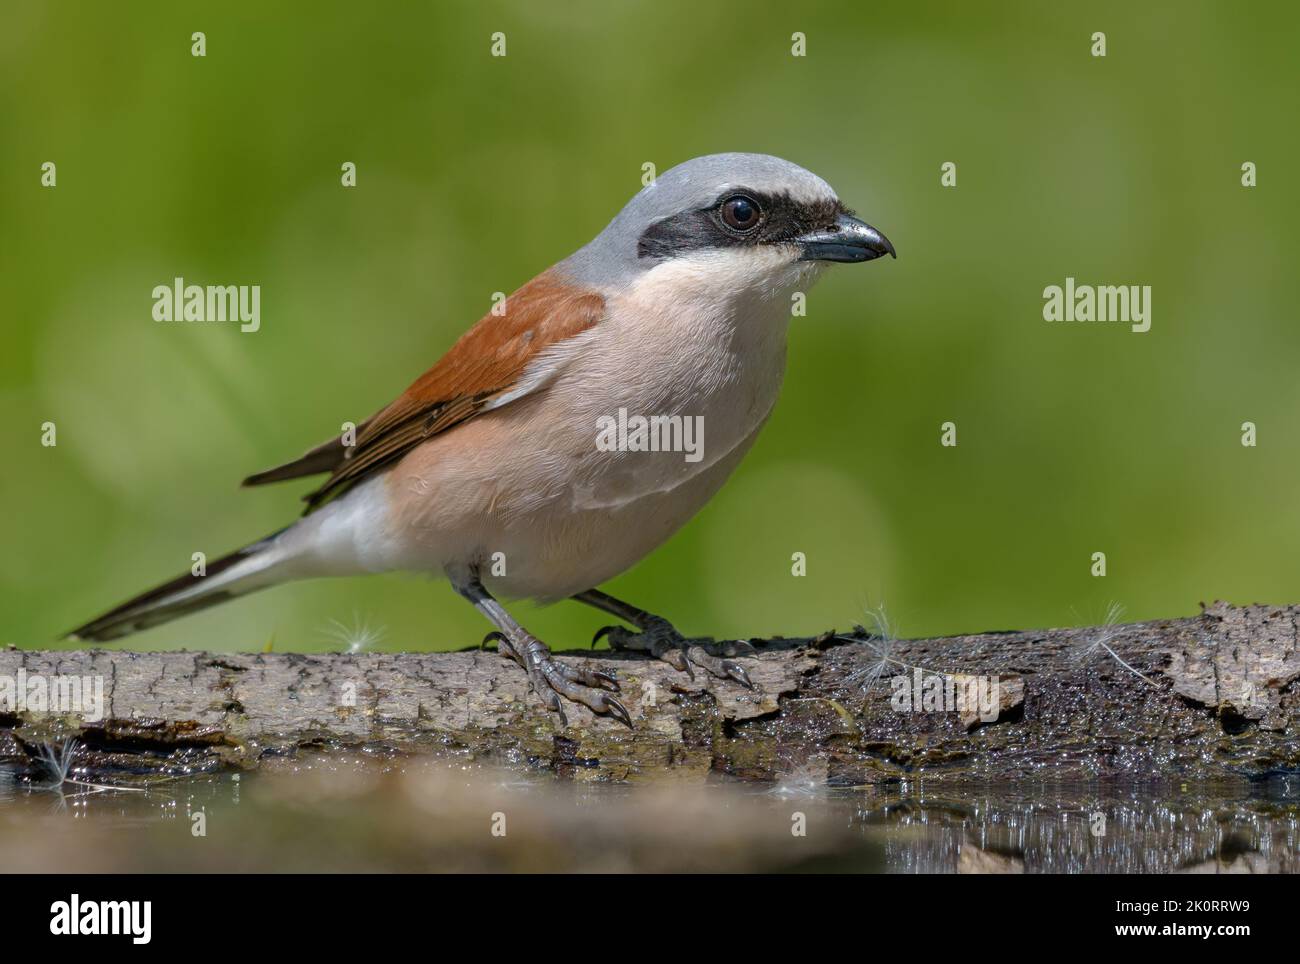 Male Red-backed shrike (Lanius collurio) posing at the fallen branch with green background Stock Photo